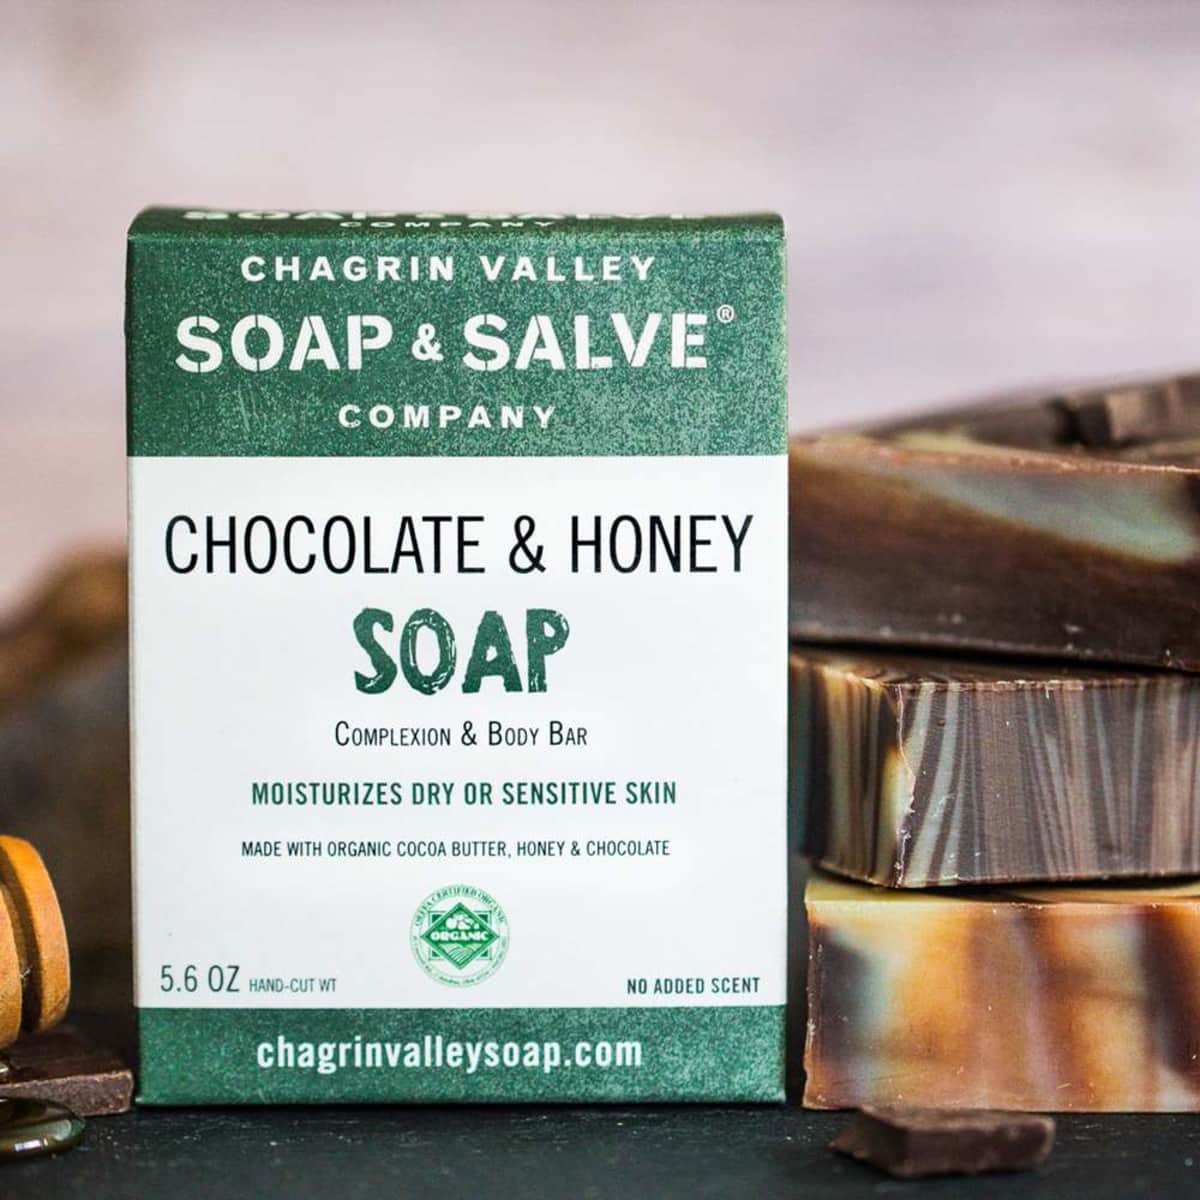 Chagrin Valley Chocolate & Honey Soap